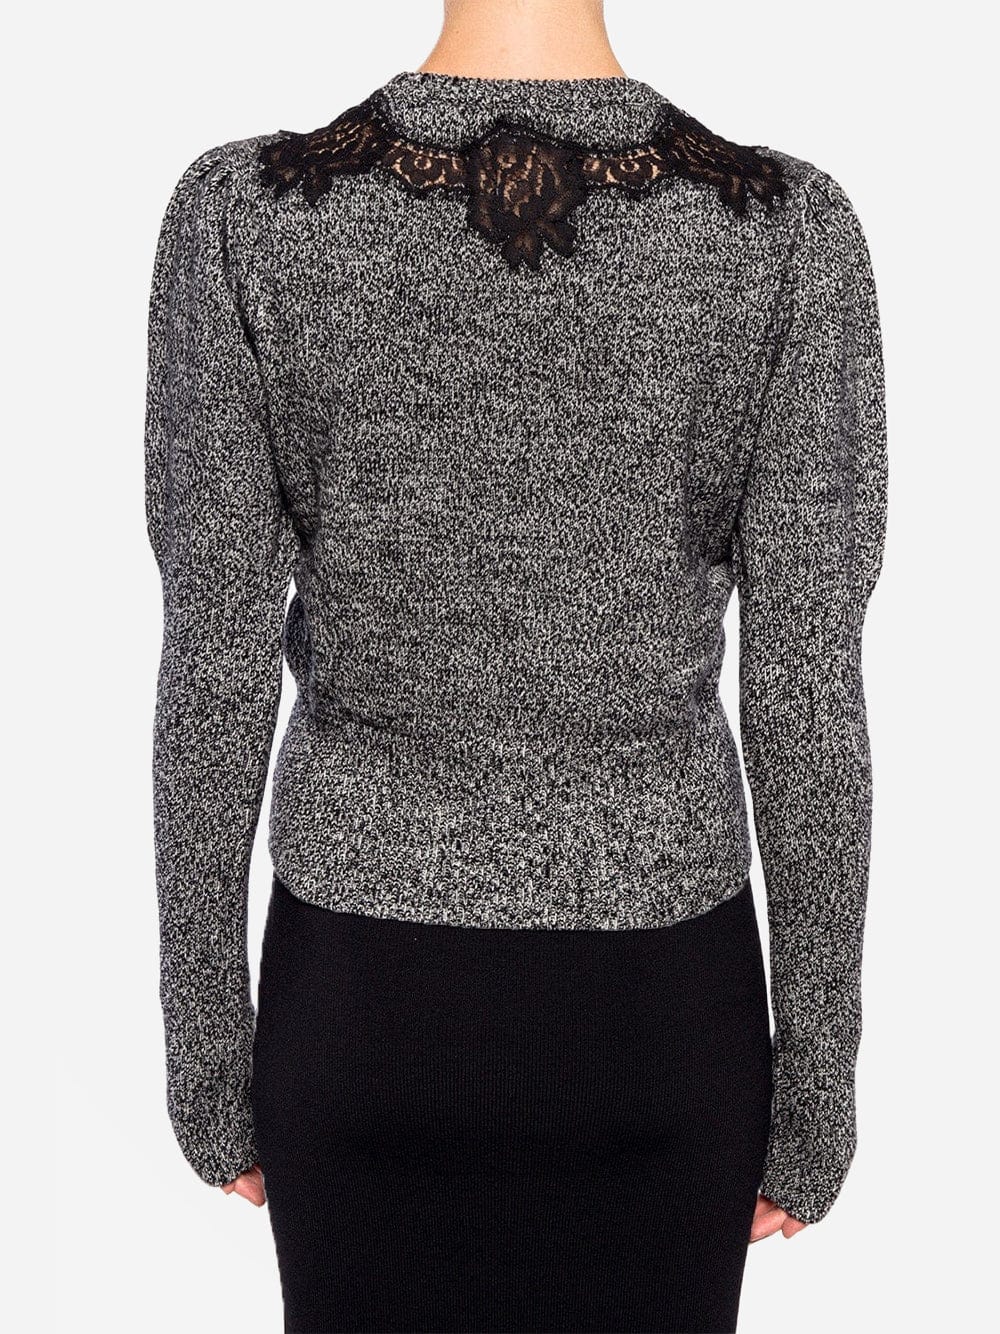 Dolce & Gabbana Lace-Trimmed Sweater